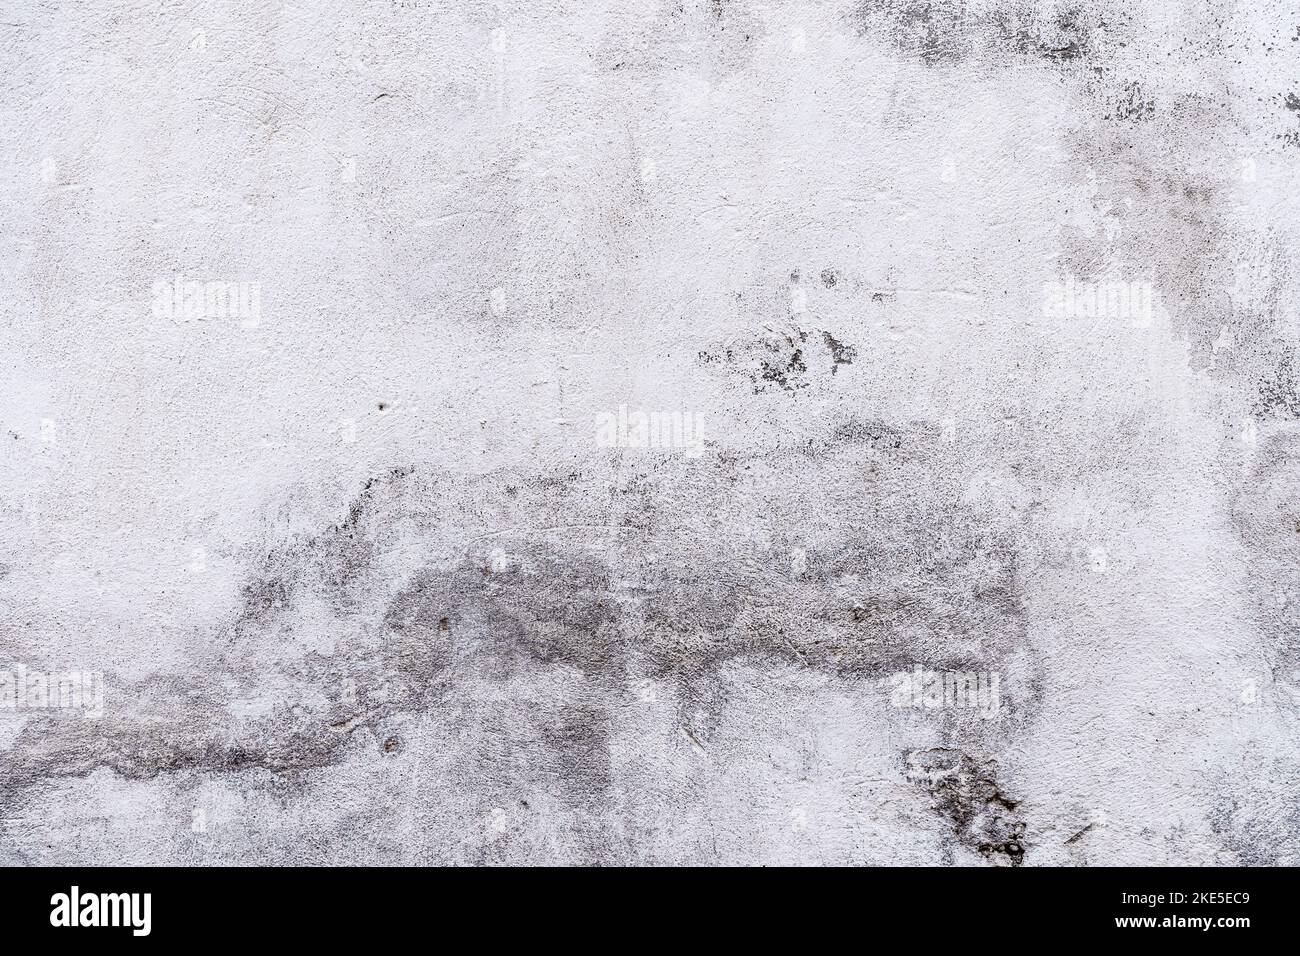 Grunge Distressed Whitewashed Gray Concrete Wall Mural